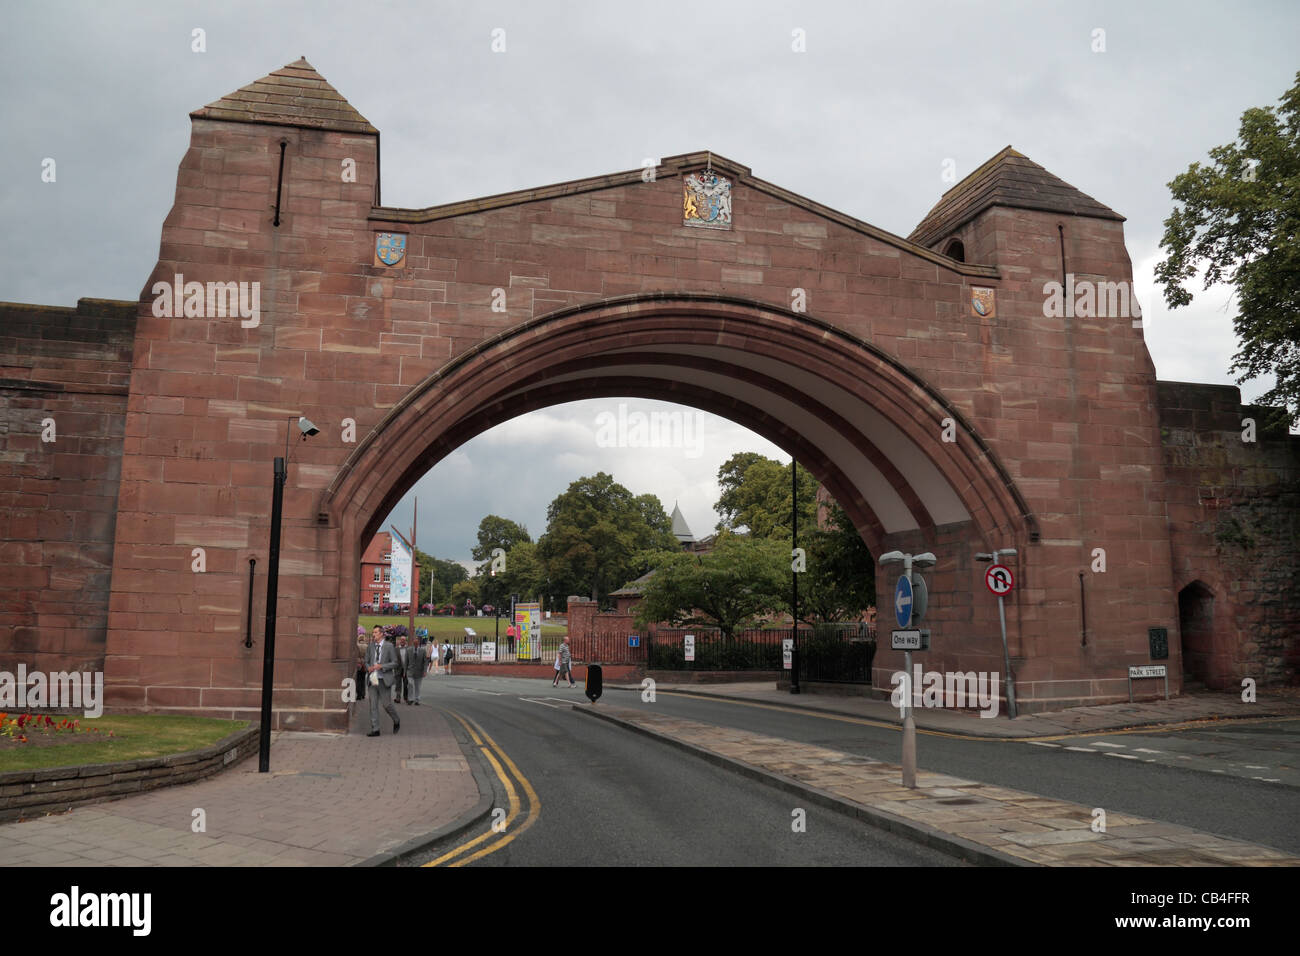 The Newgate, built in 1938, on Pepper Street, Chester, Cheshire, England. Stock Photo